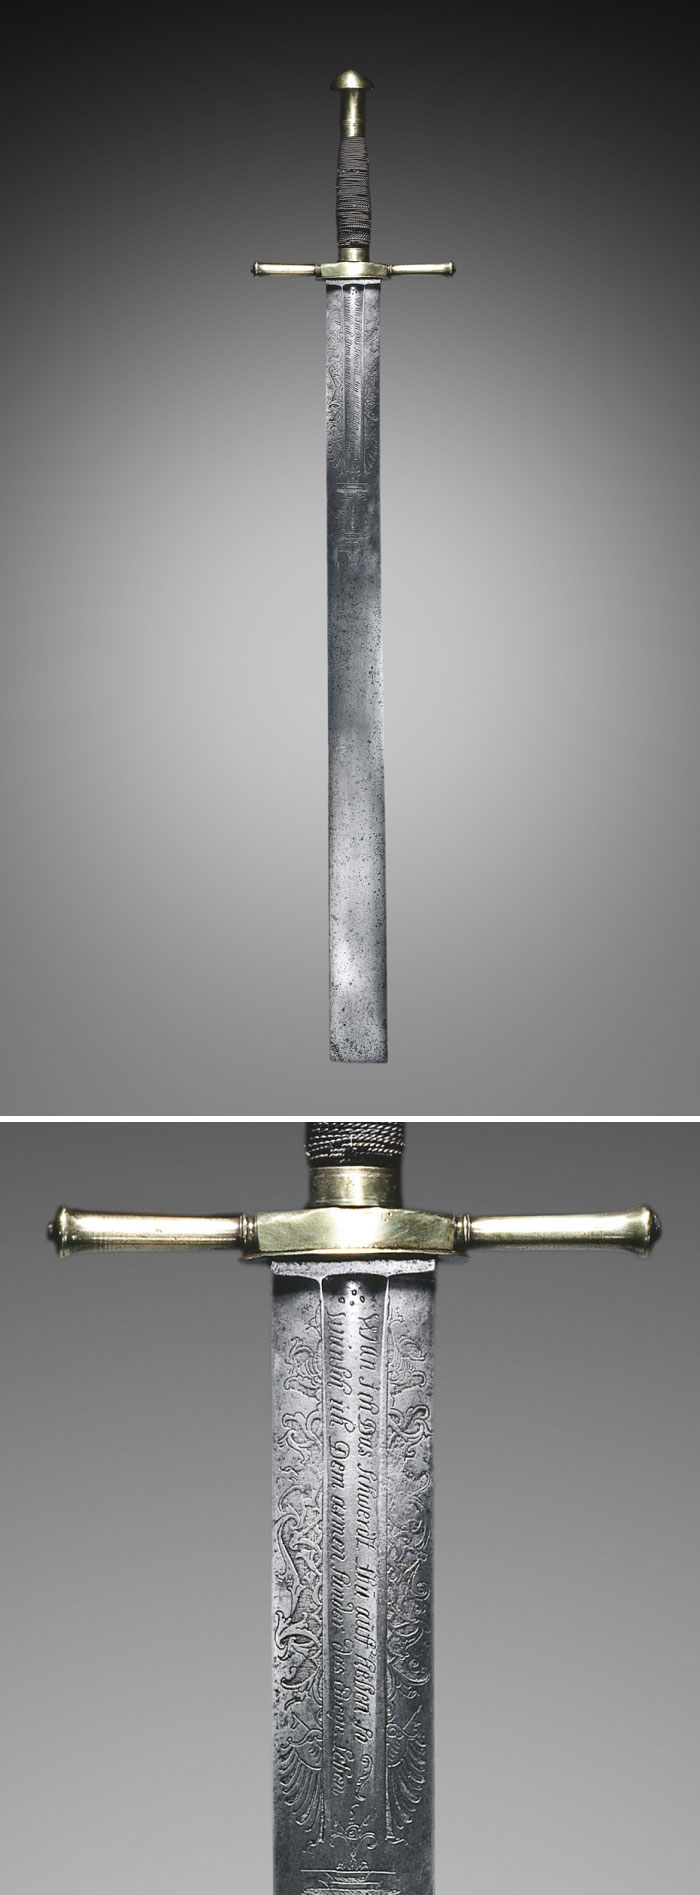 Executioner's Sword With An Inscription That Reads "When I Raise This Sword, So I Wish That This Poor Sinner Will Receive Eternal Life". Germany, Late 17th Century